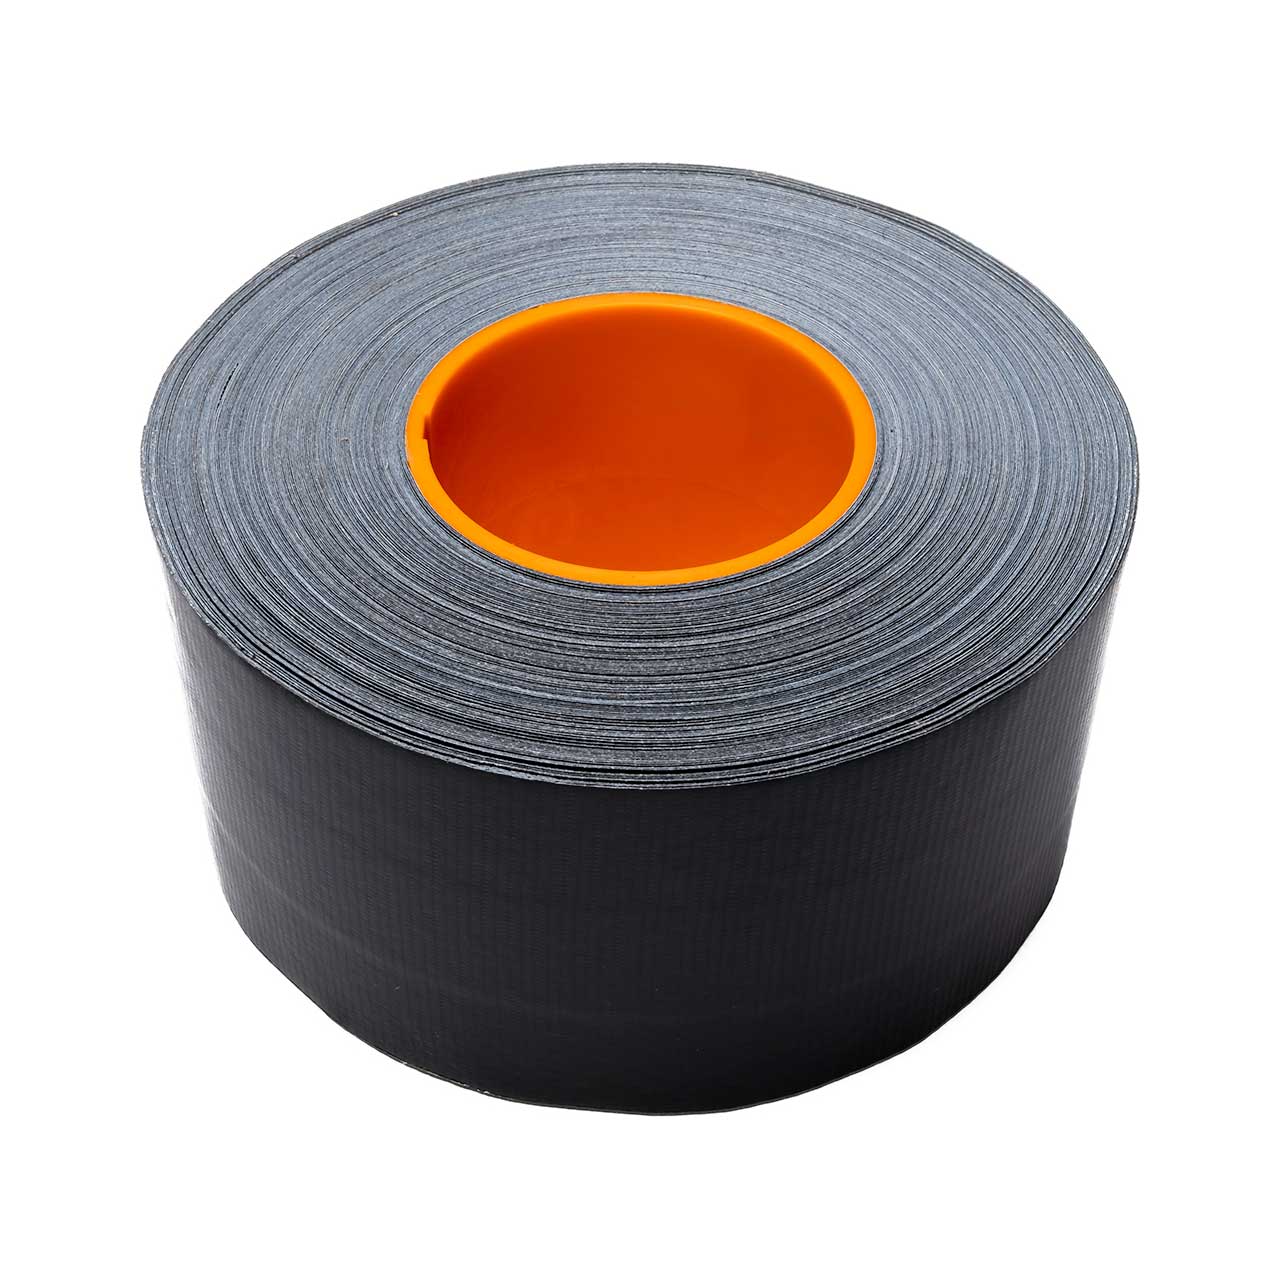 GaffTech 3-Inch Matte Black Dry Channel Cable Path Tunnel Duct Tape for GaffGun - 55 Yard Roll GAF-AVDC355-BK